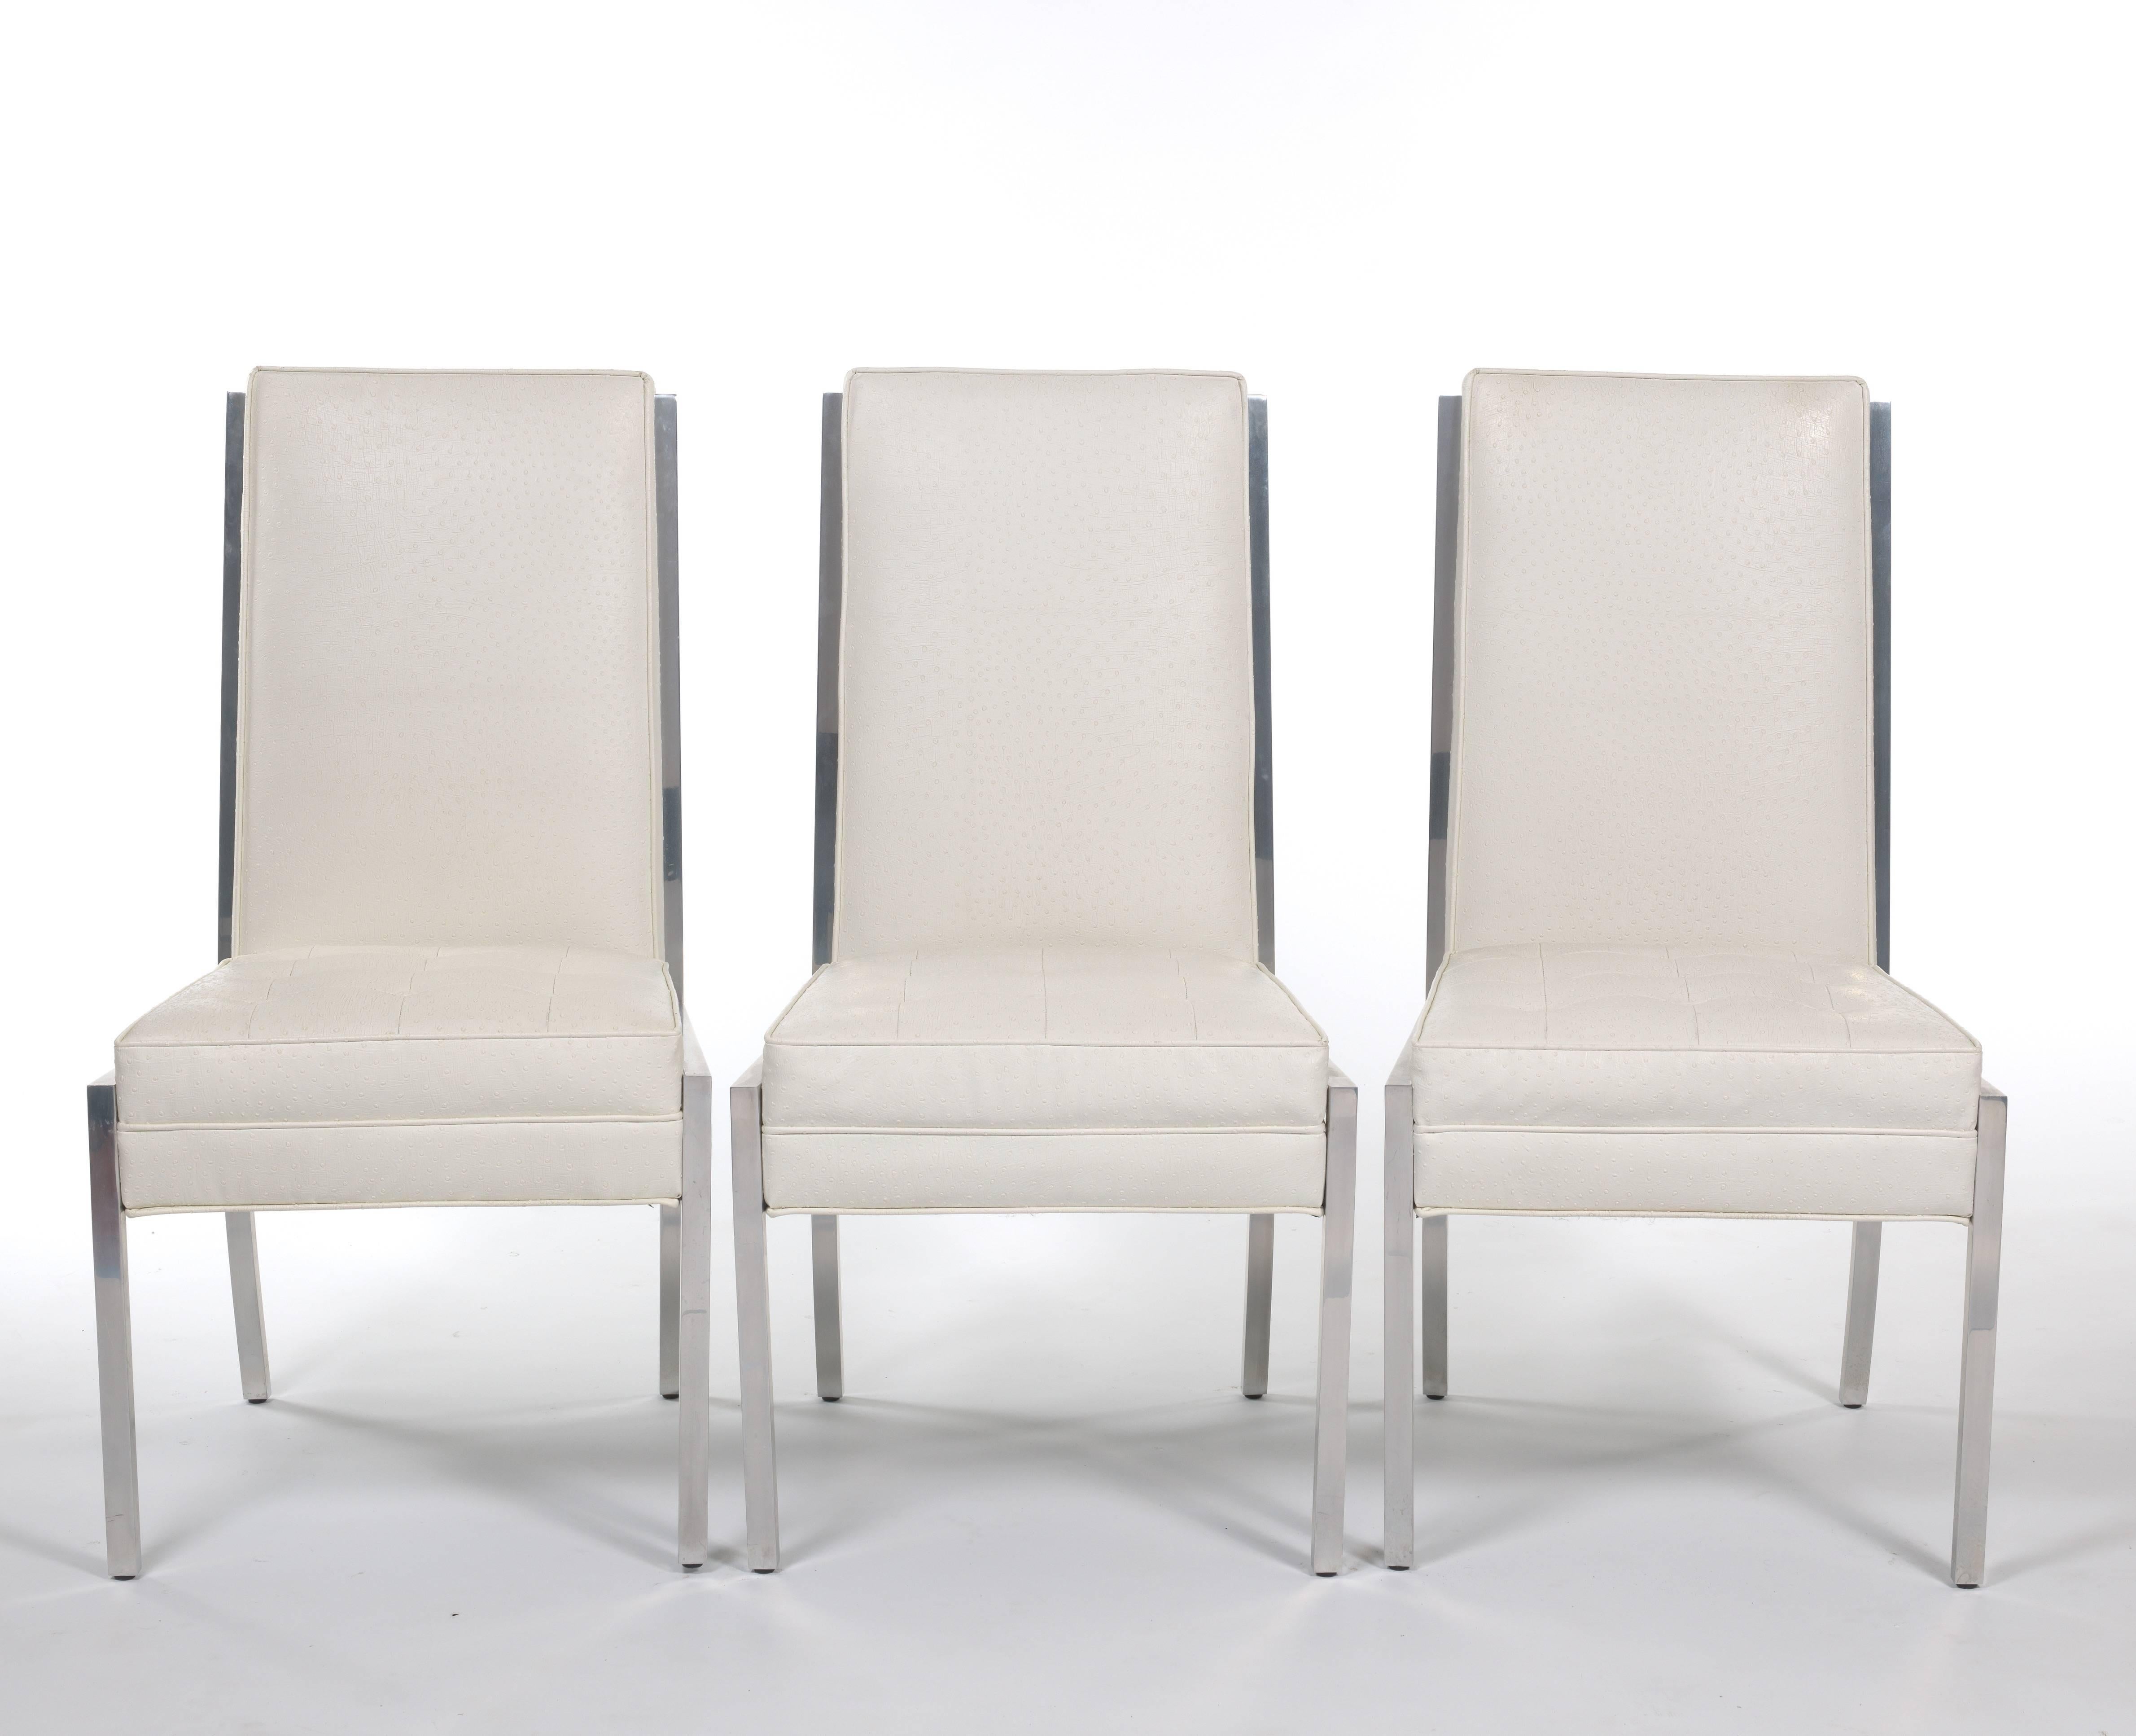 A lovely set of eight dining chairs that will make you feel like you are sitting in the height of 1970s glamour. Two armchairs and six side chairs covered in white faux ostrich leather with tufted seats and chrome frames. These chairs have elegant